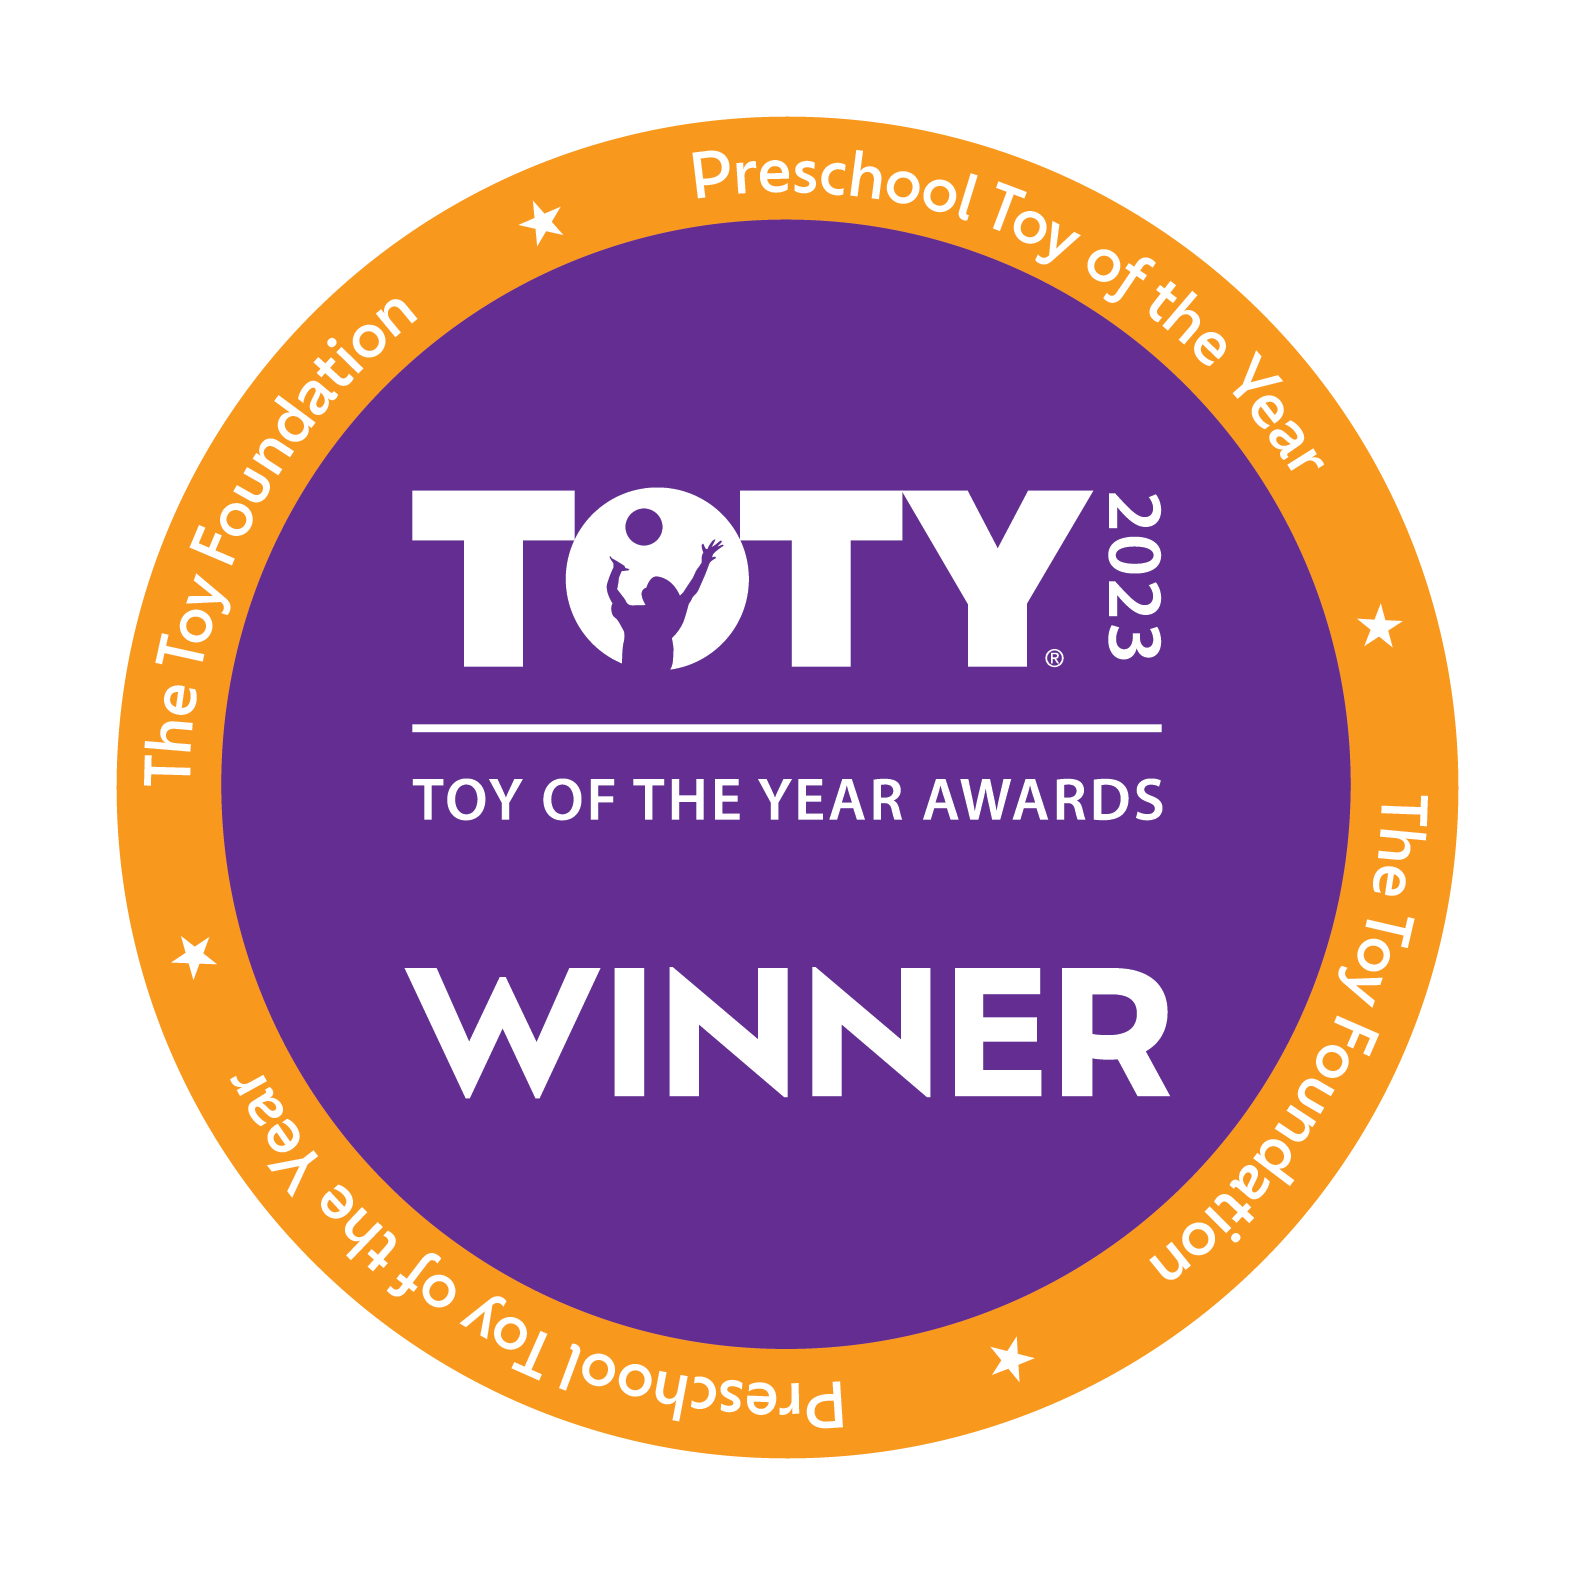 TOTY (Toy Of The Year) Winner Award Seal for the Downhill Duo 40-Piece Set in the Preschool category.